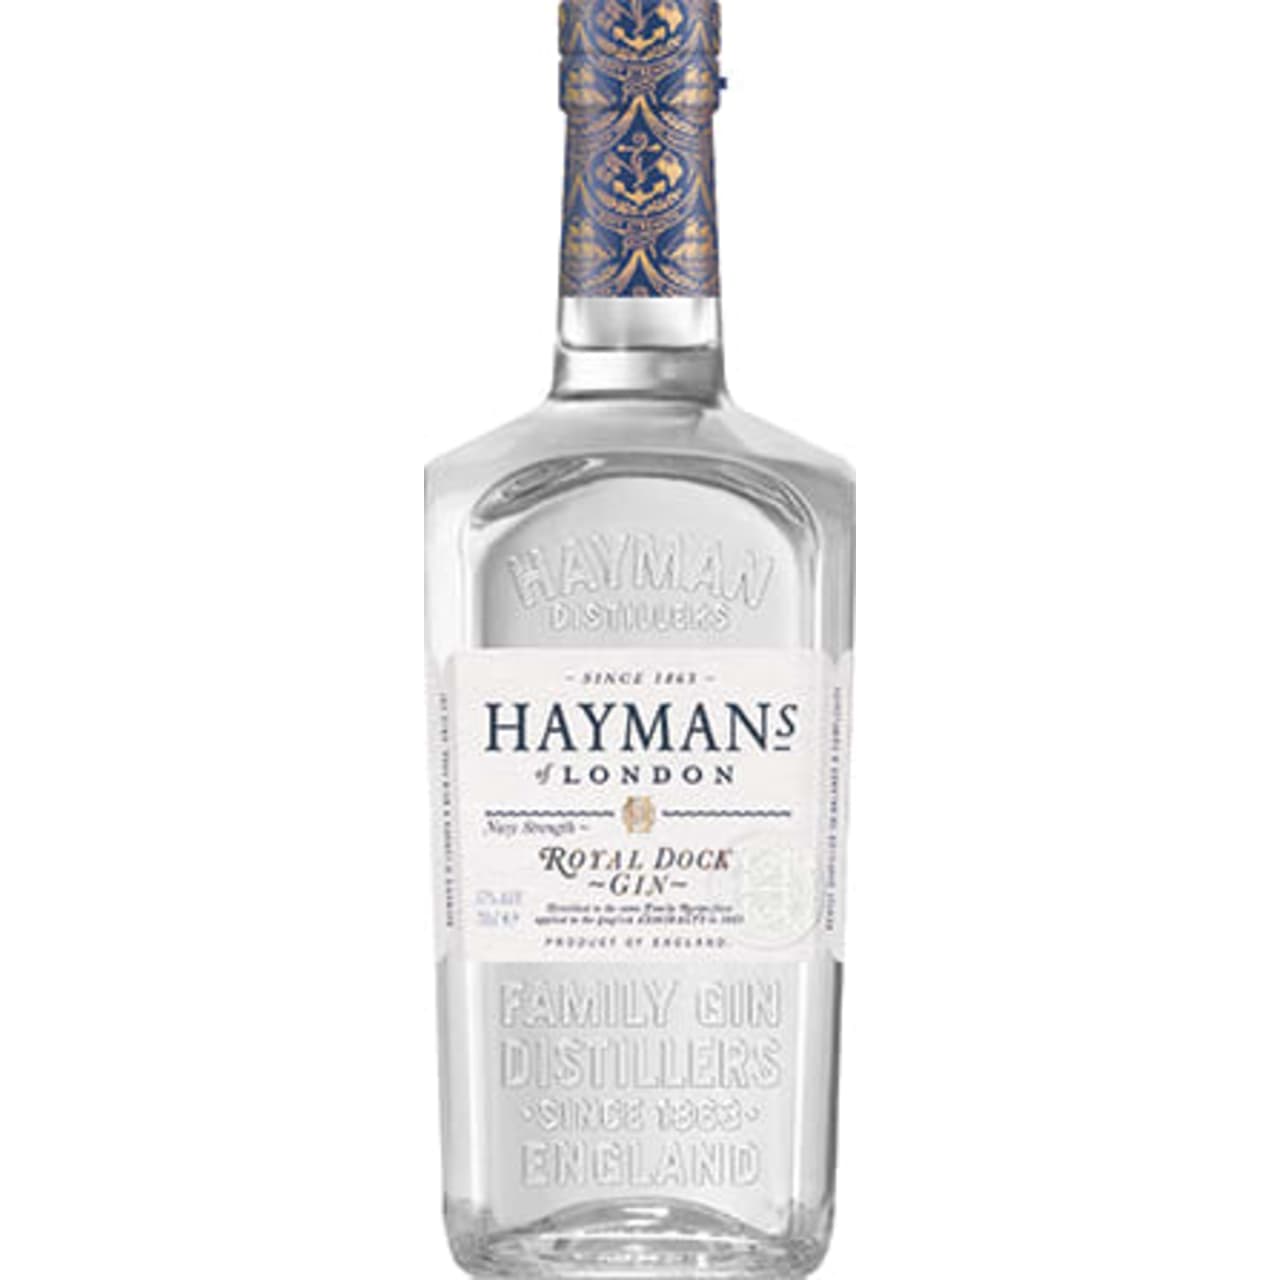 First supplied to the English Admiralty in 1863, Hayman’s is still proudly making their Navy Strength Royal Dock Gin. The style is bright, bracing and smooth with a brilliant balance of juniper, coriander and citrus.